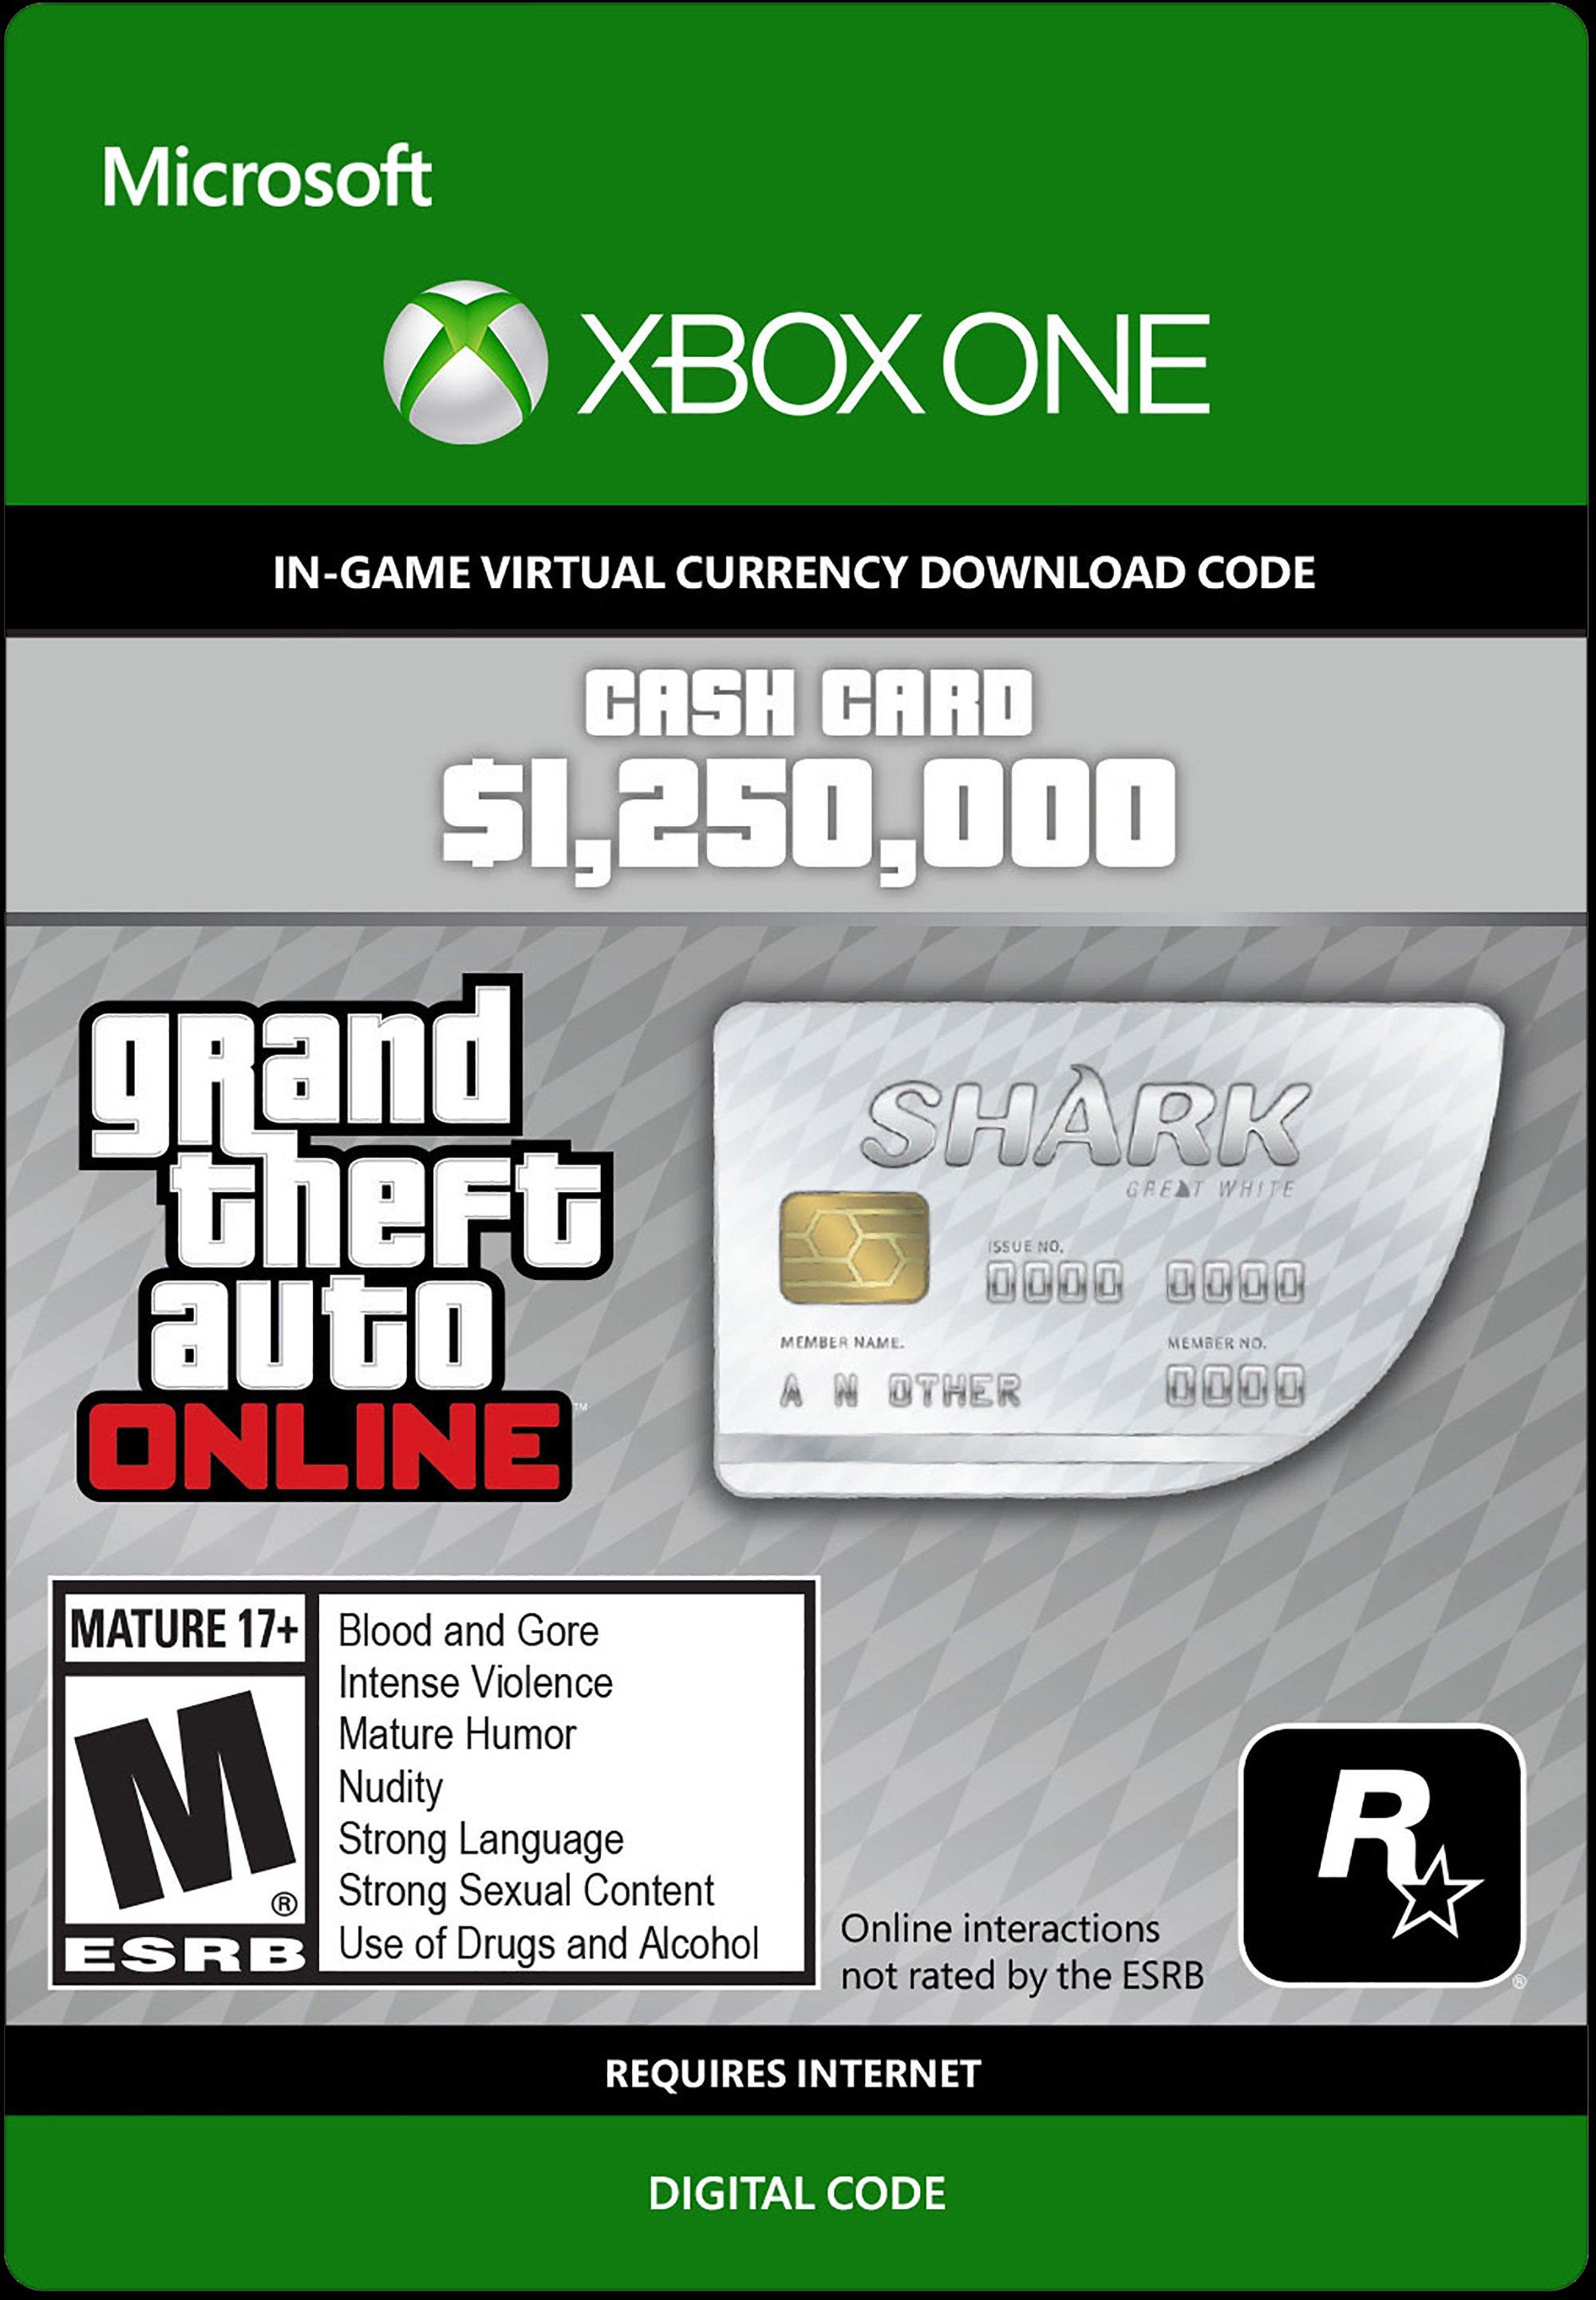 Grand Theft Auto Online The Great White Shark Cash Card Xbox